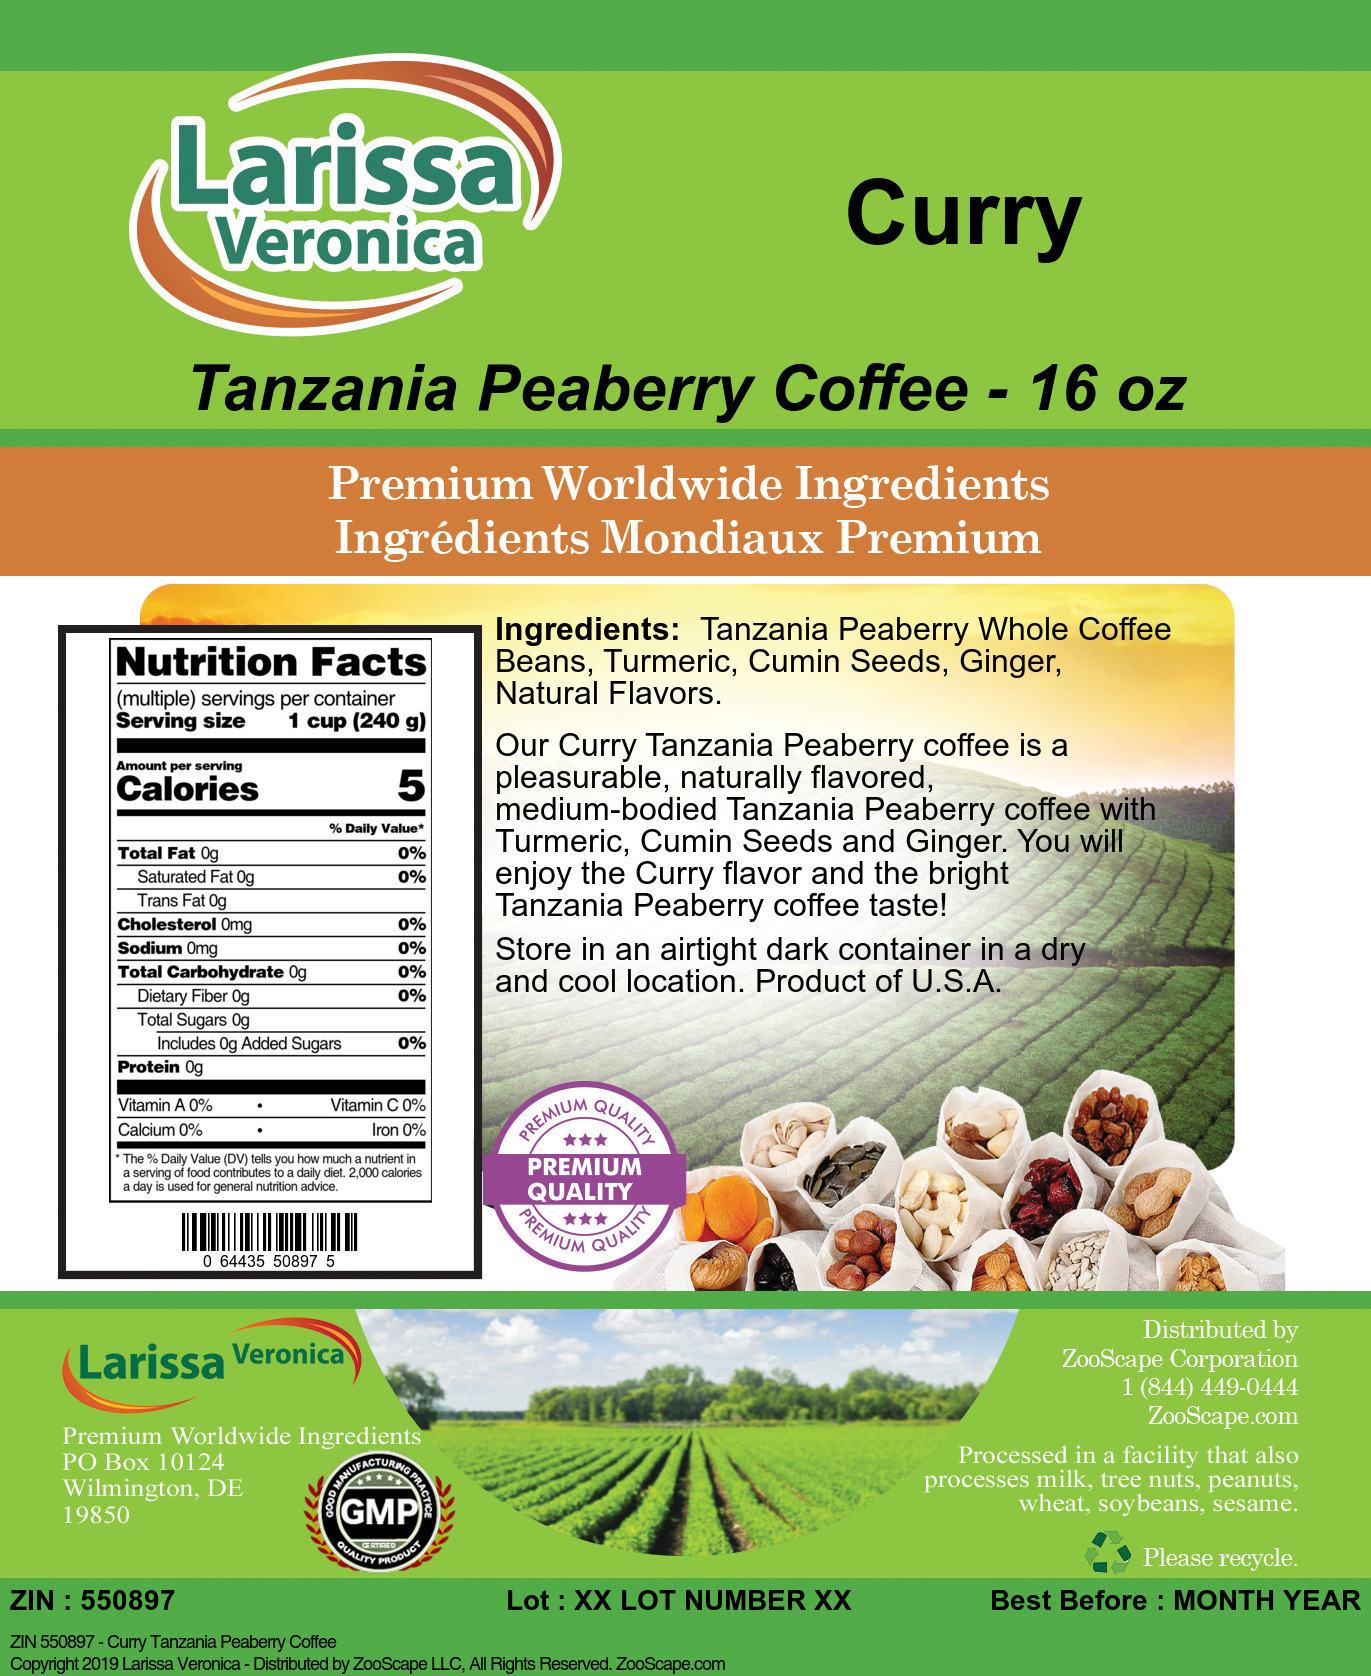 Curry Tanzania Peaberry Coffee - Label